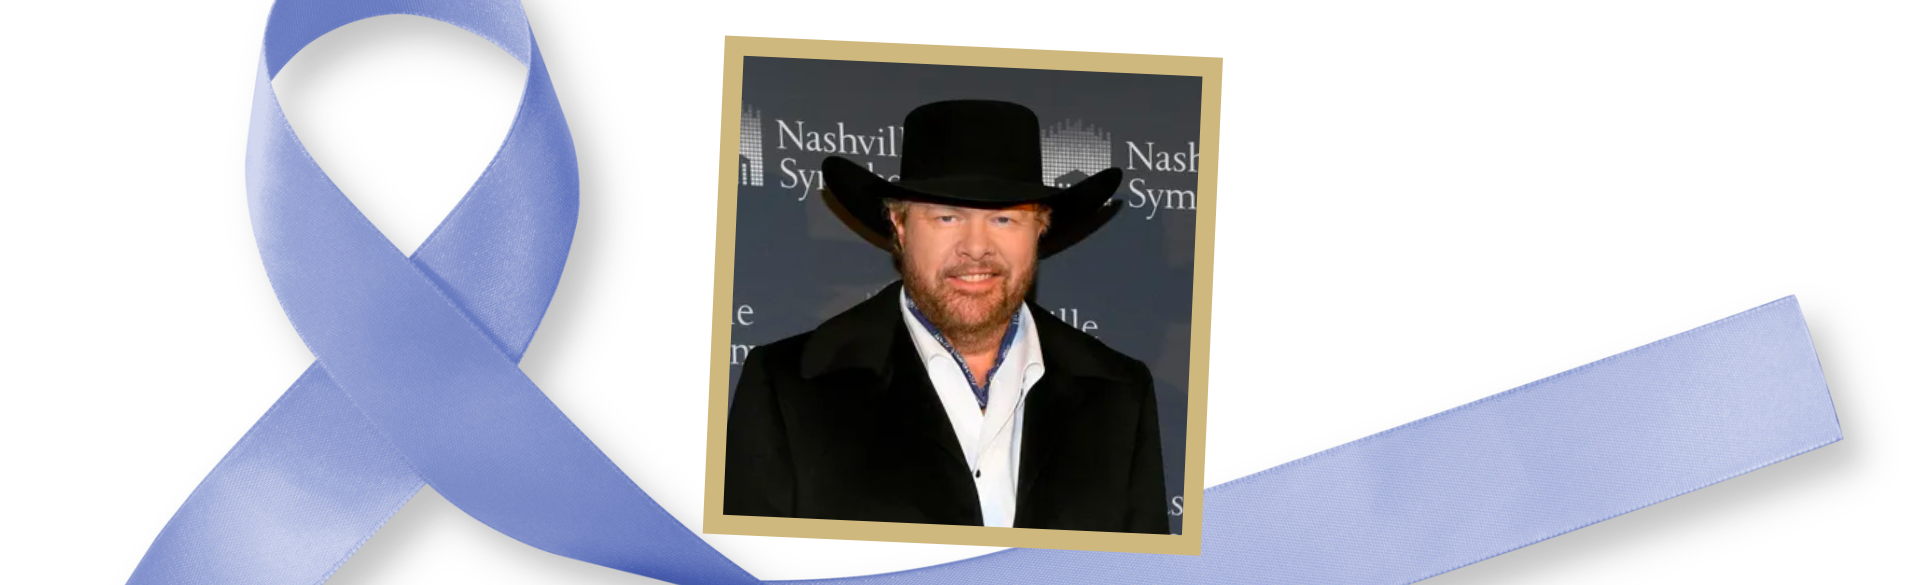 Toby Keith health: What's happening with his stomach cancer battle